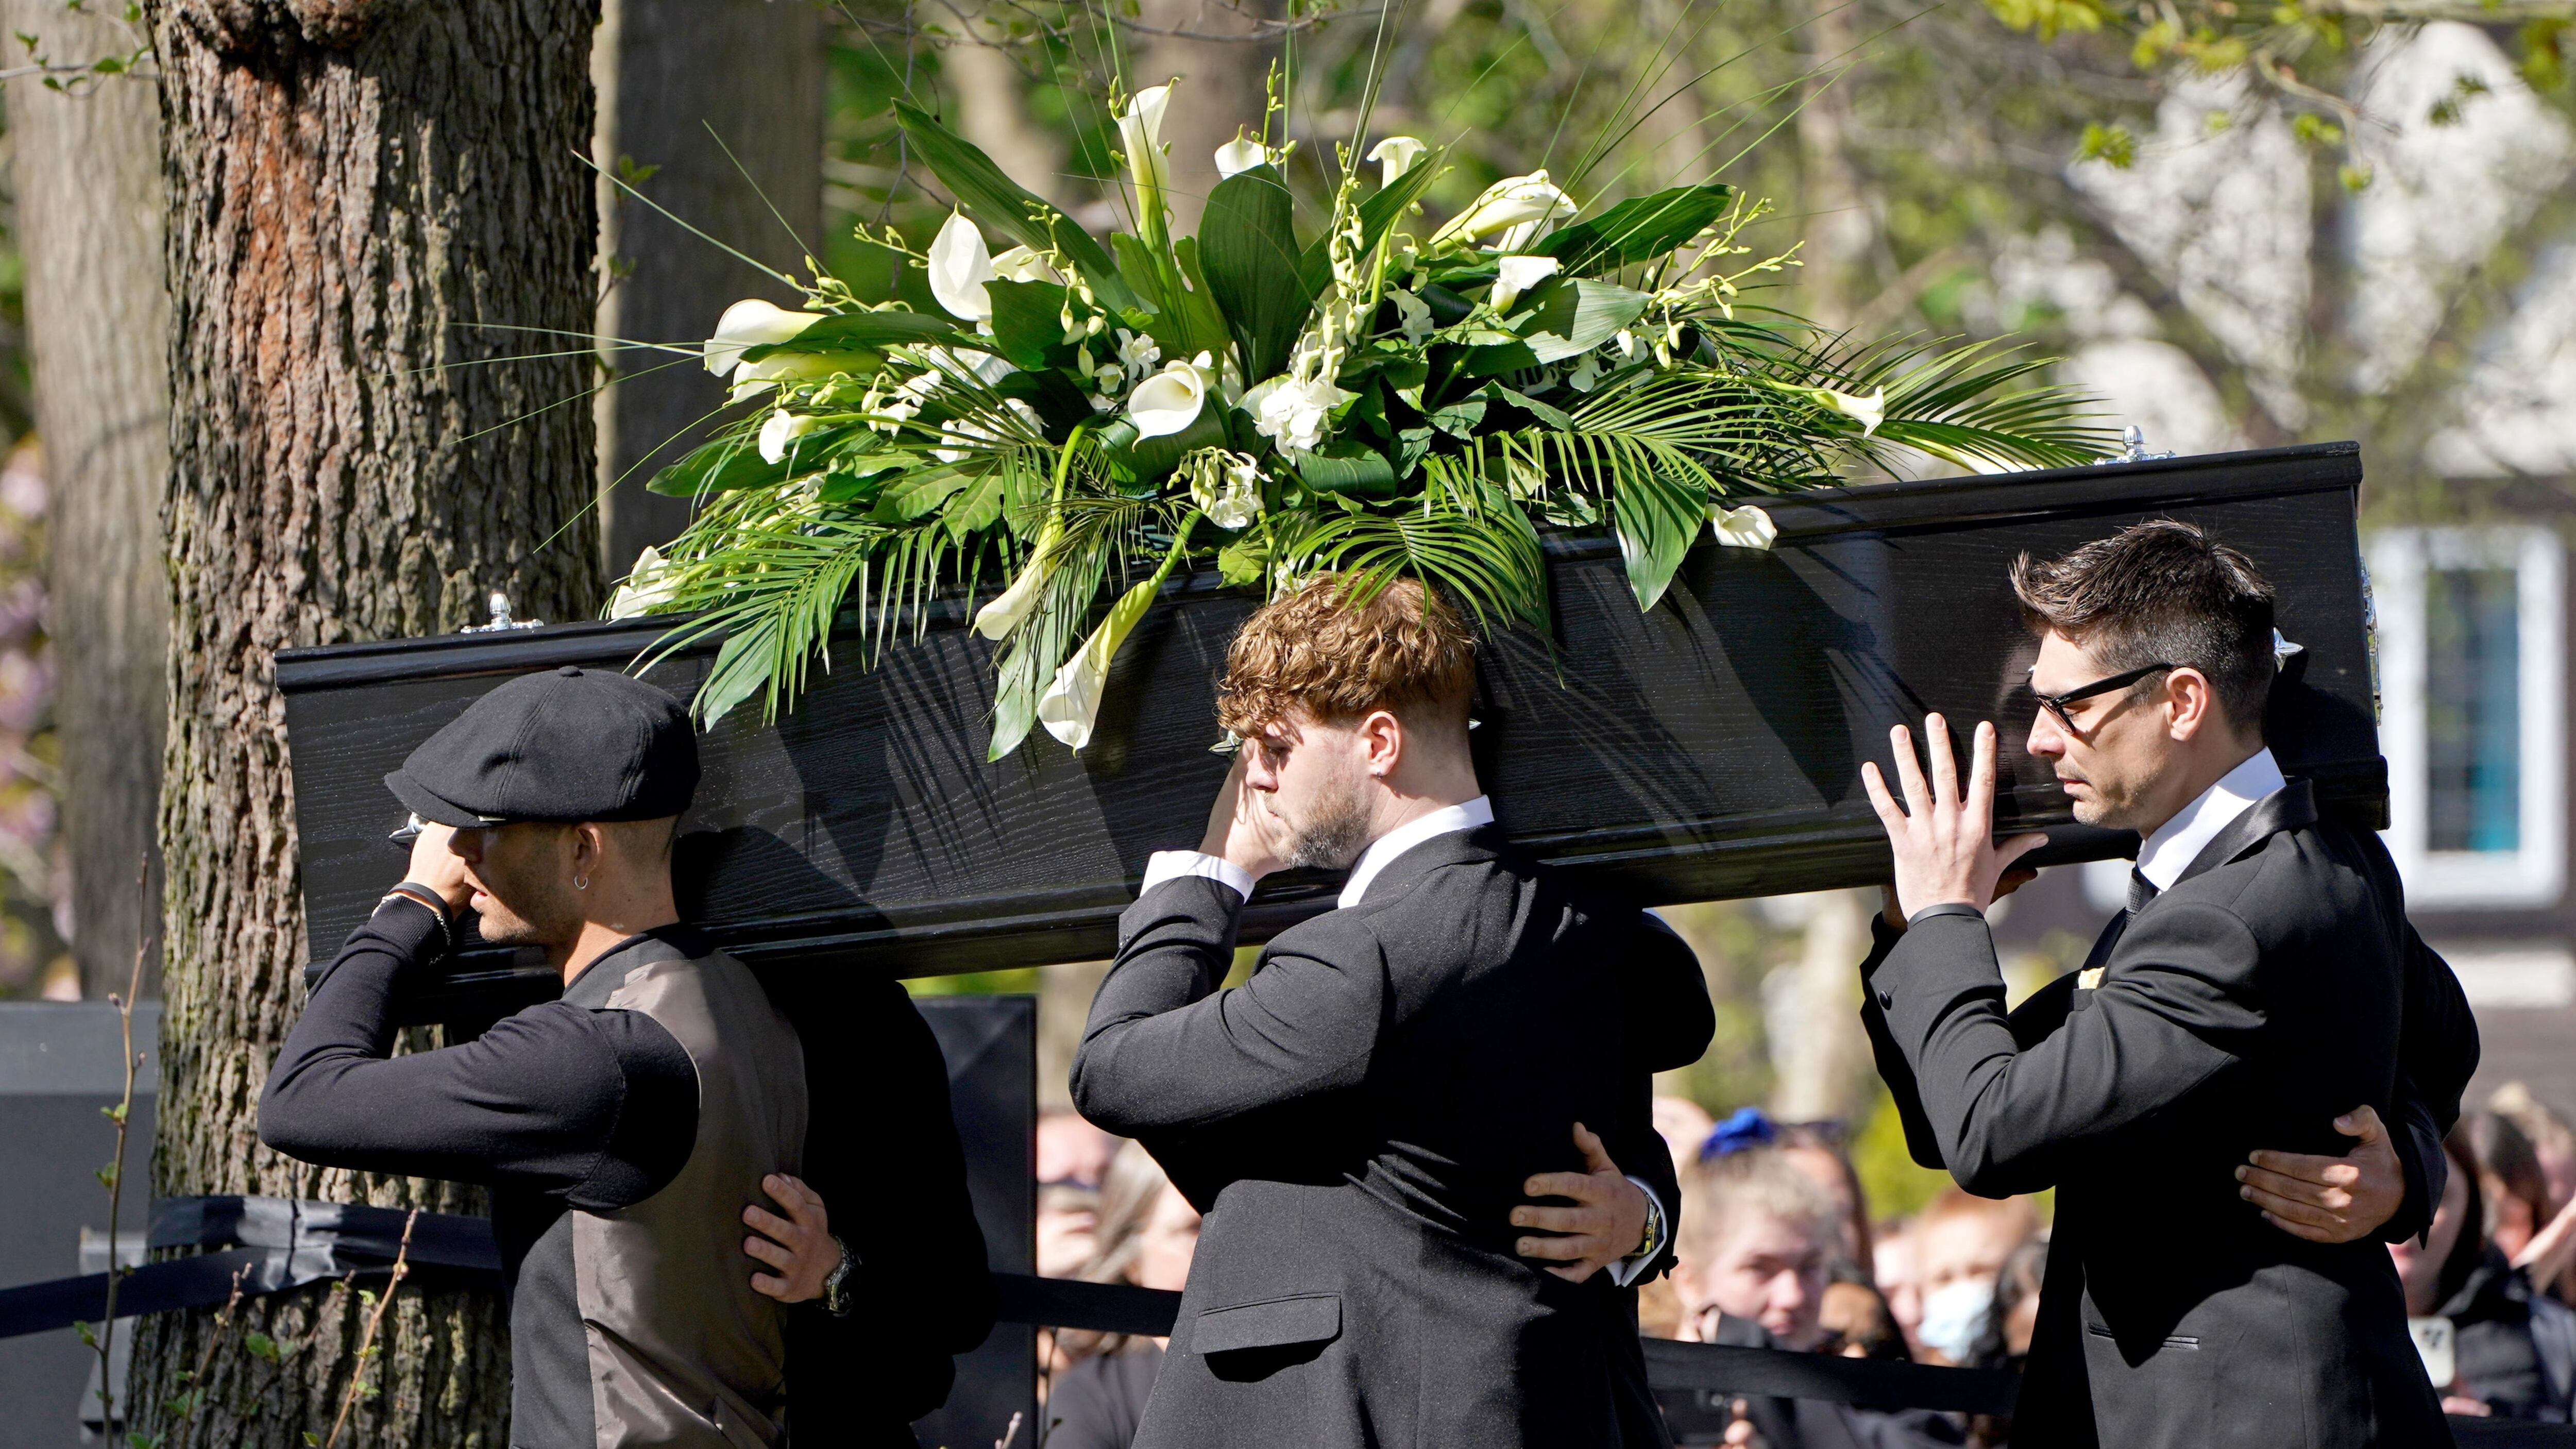 The Wanted singer was laid to rest on Wednesday.